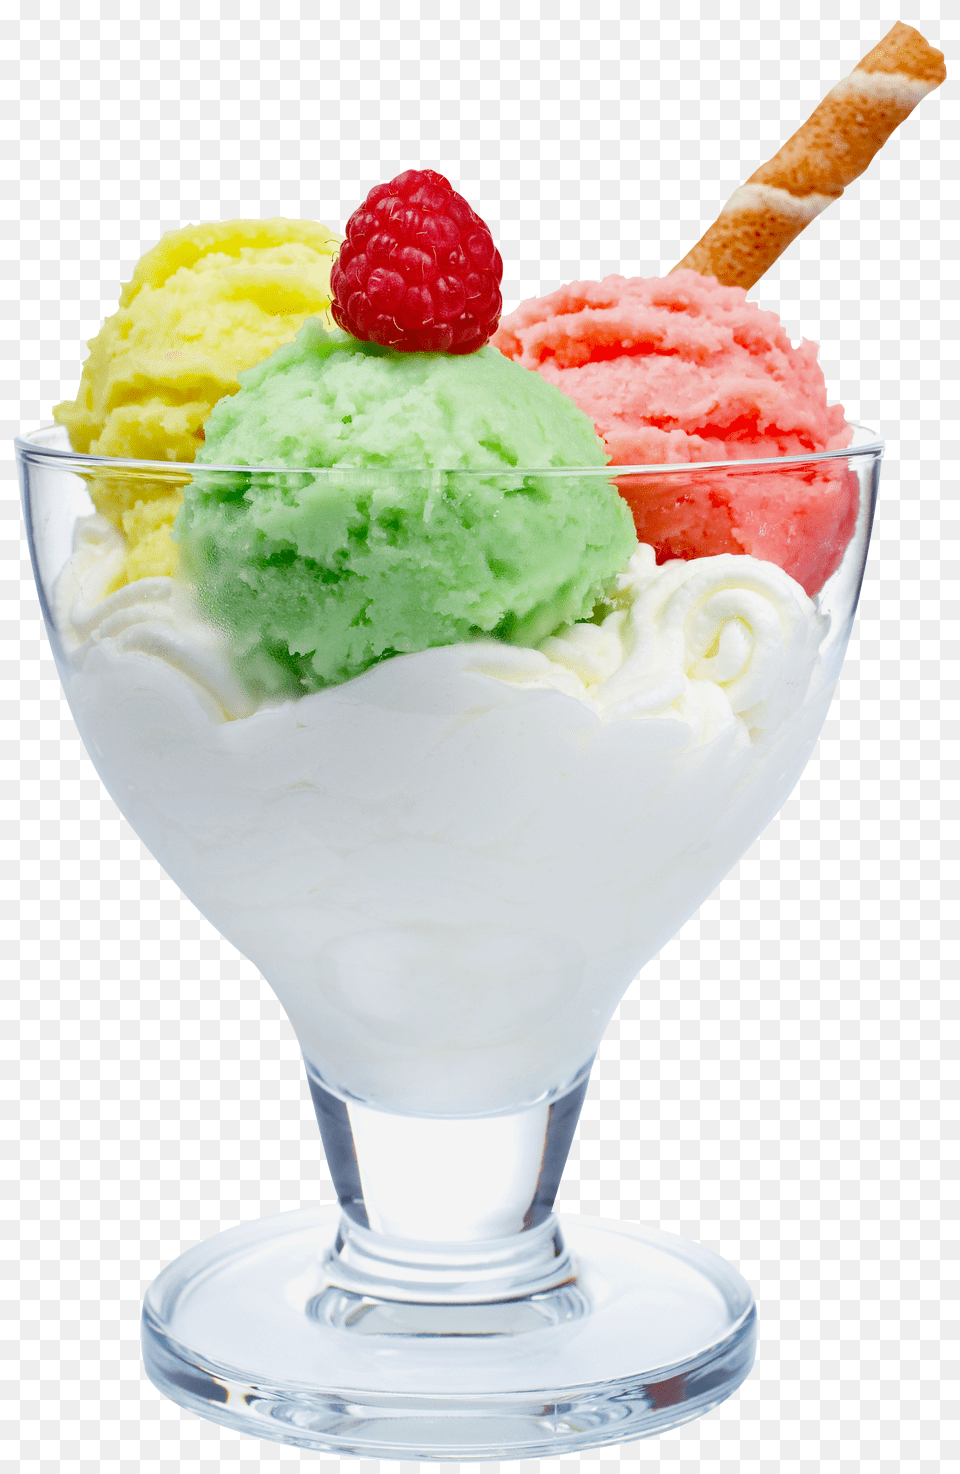 Ice Cream Image Free Png Download